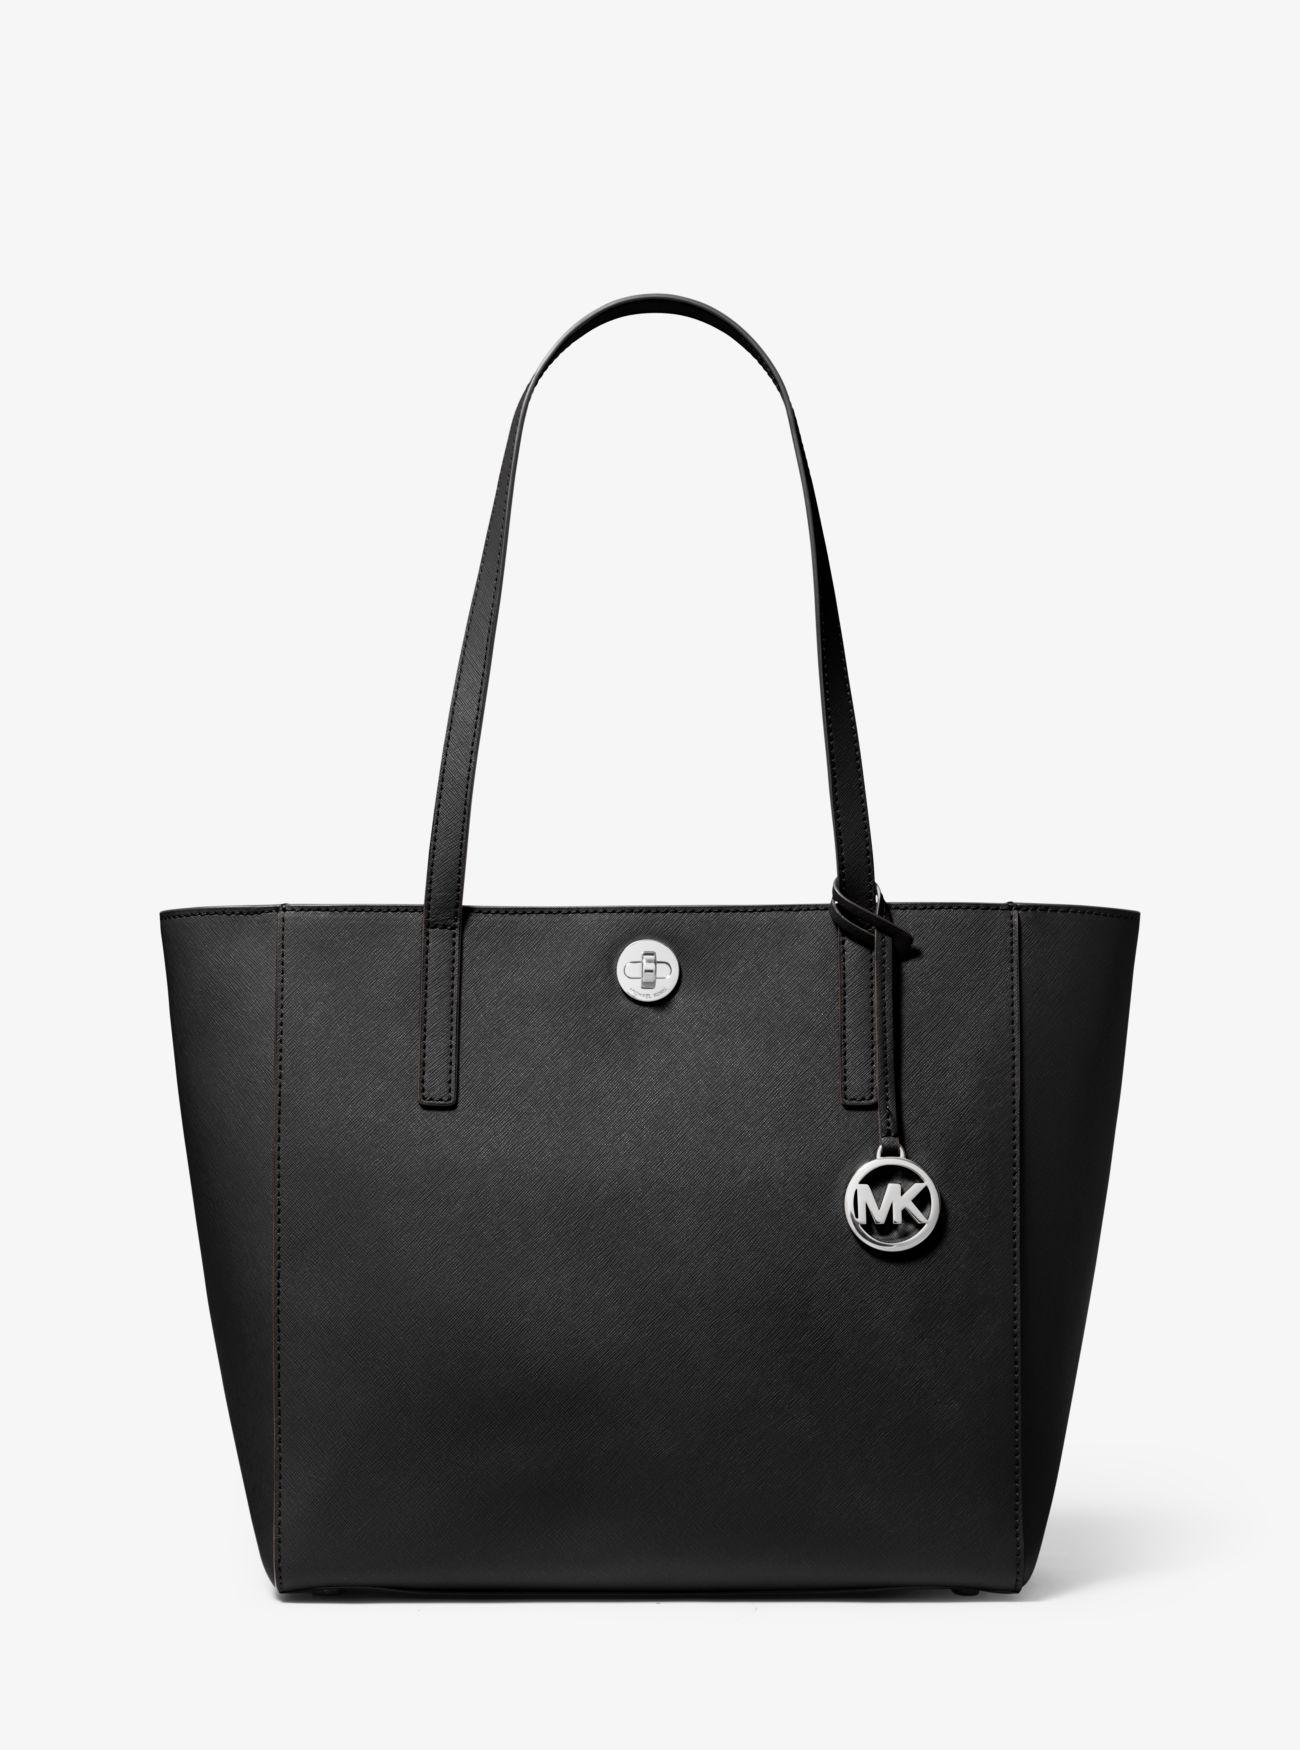 Michael Kors Synthetic Rivington Large Saffiano Leather Tote Bag in Black - Lyst